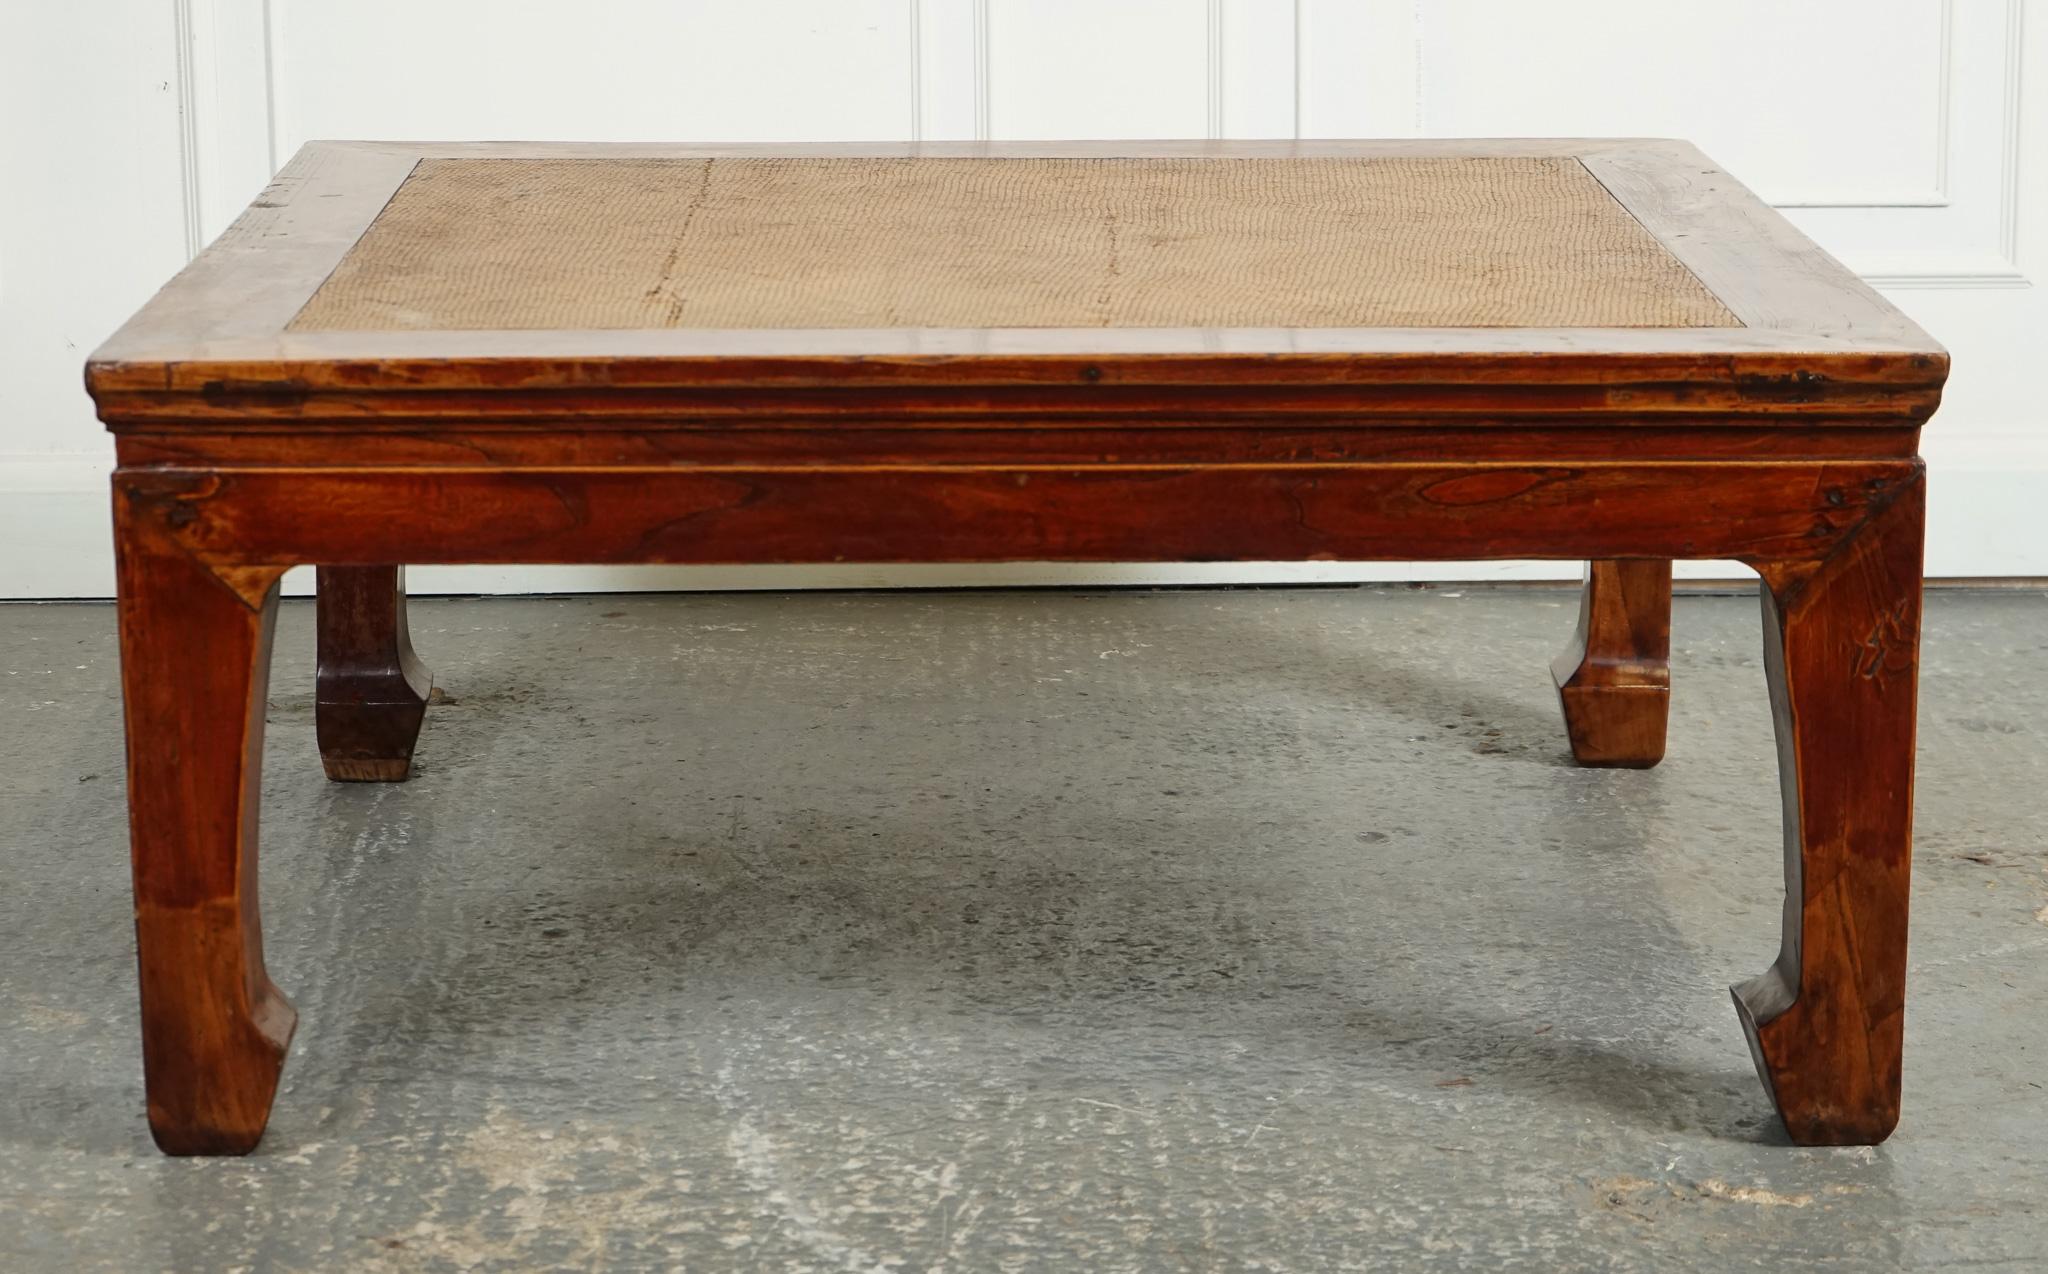 

We are delighted to offer for sale this Large Antique Distressed Chinese Opium Coffee Table With Cane Inset Top.

This table is a unique and impressive piece of furniture that reflects the rich cultural history of China. This opium coffee table is